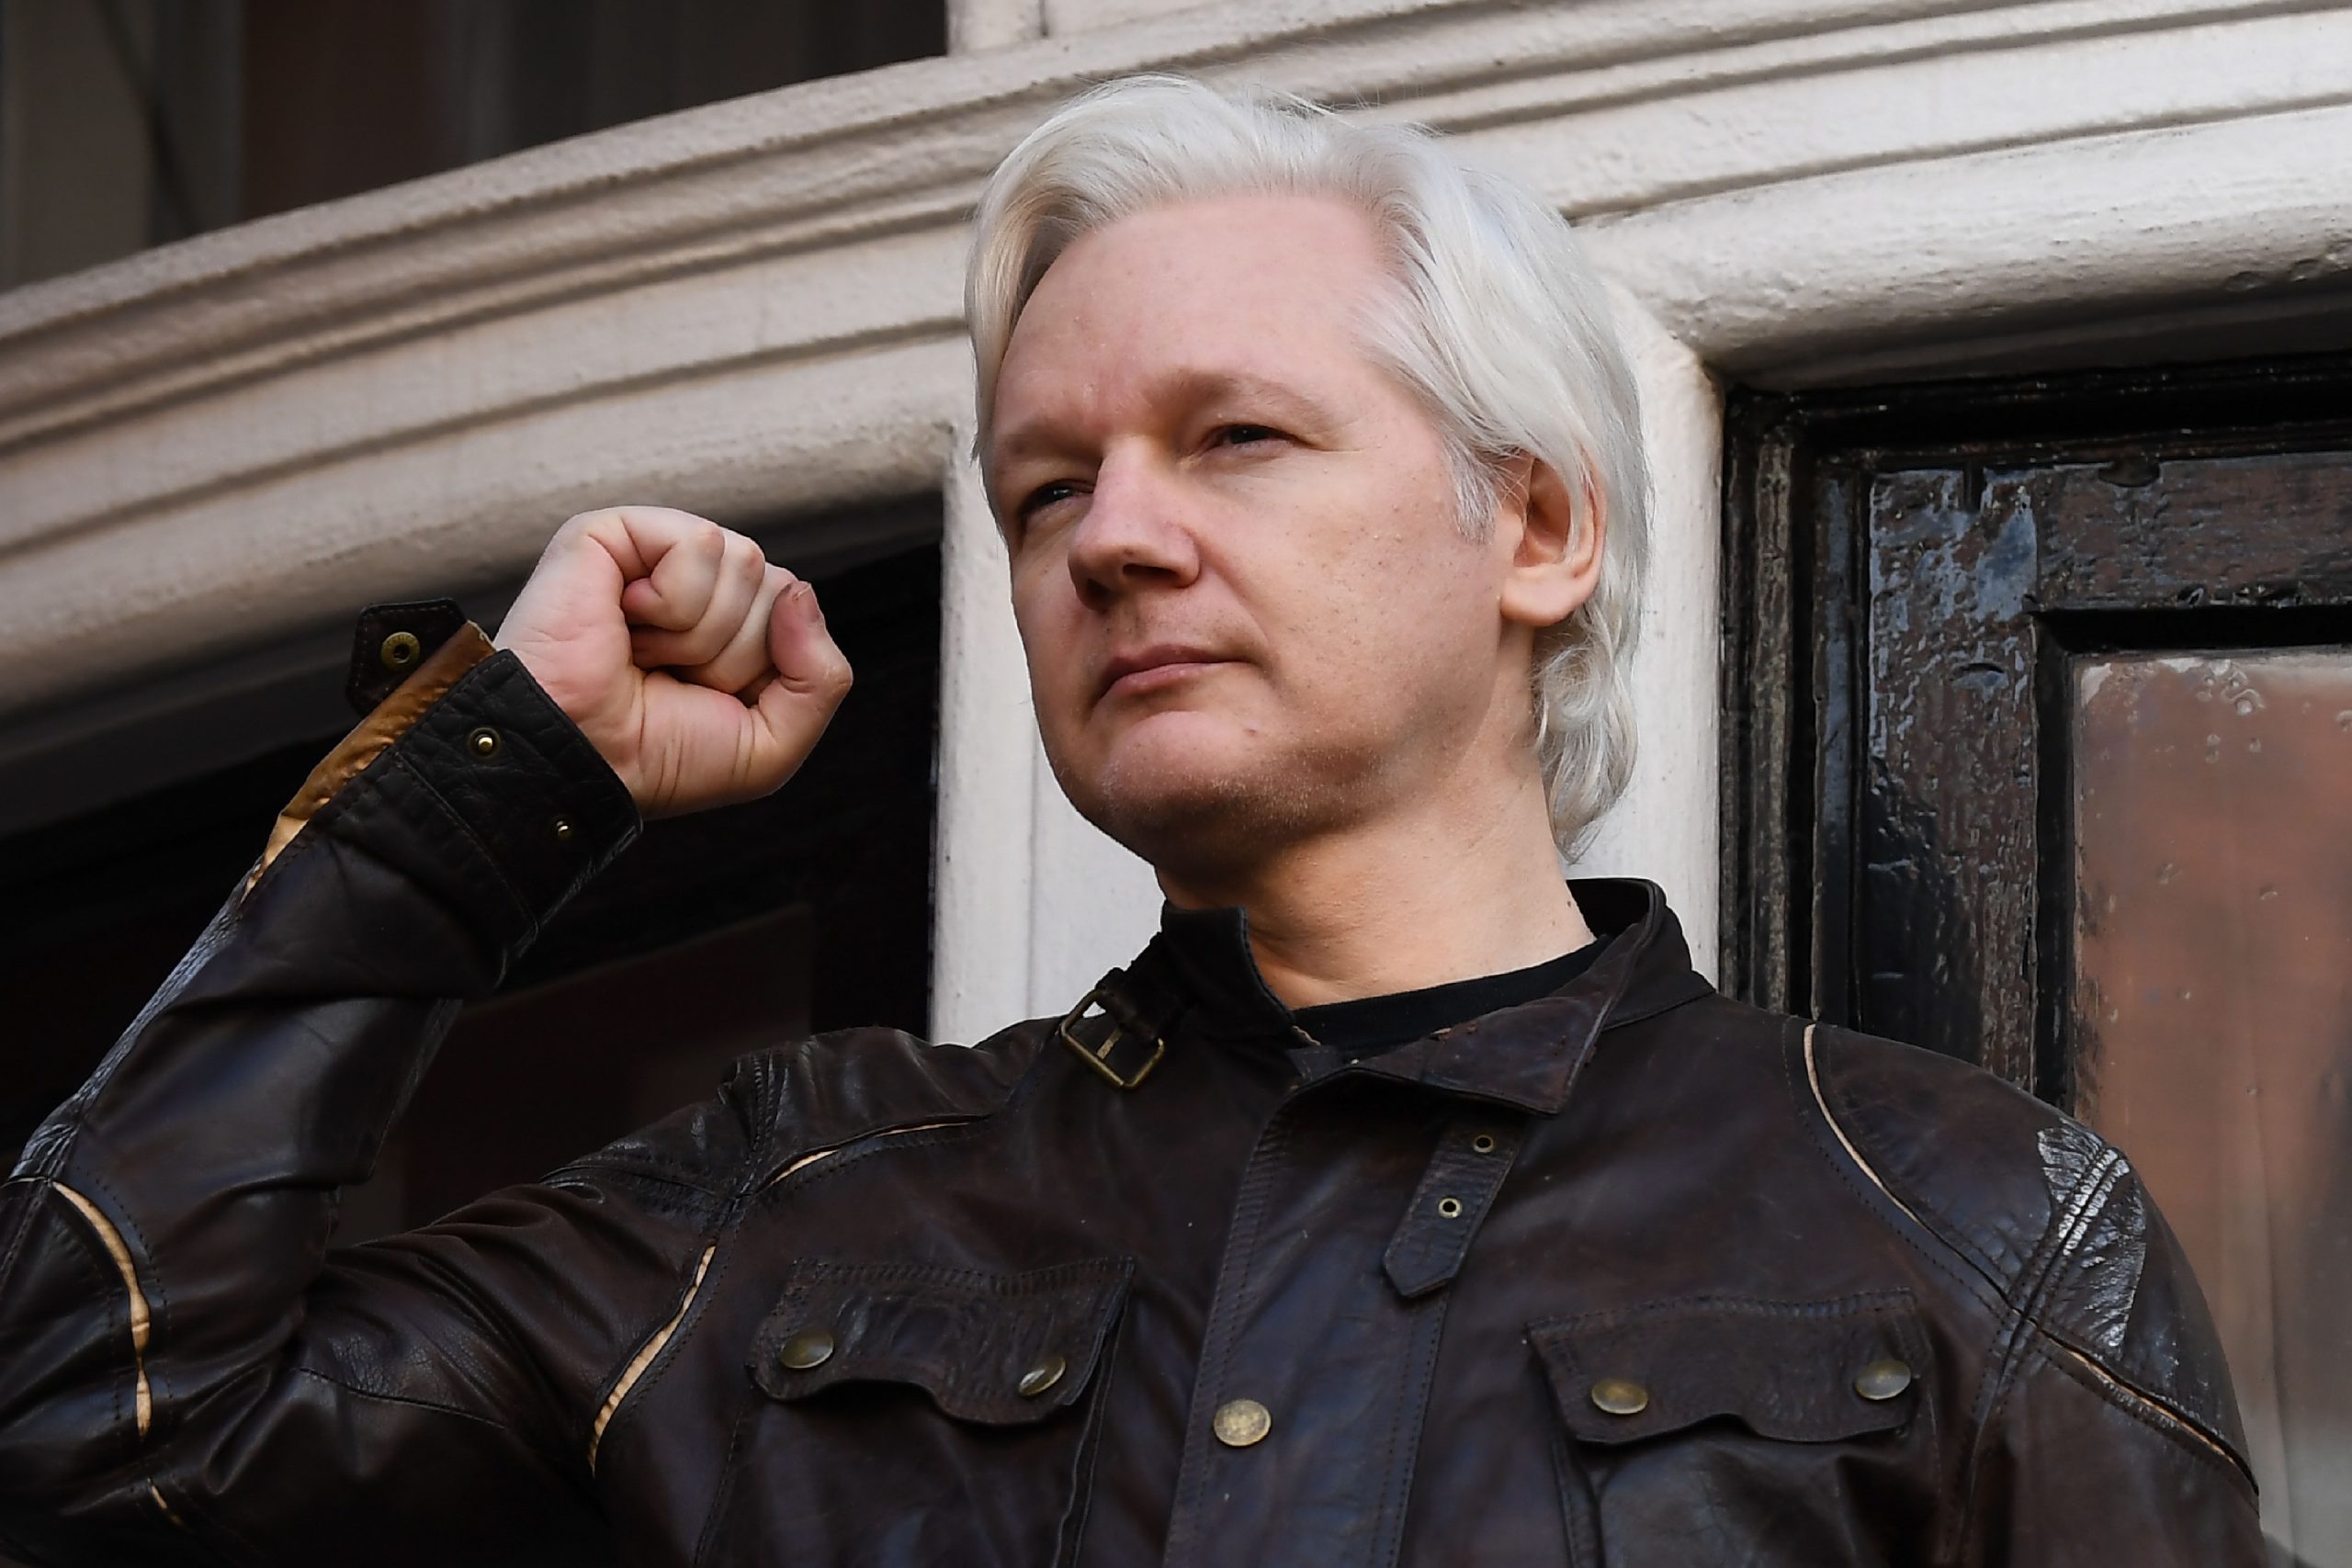 Wikileaks founder Julian Assange to fight extradition to US in highest UK court